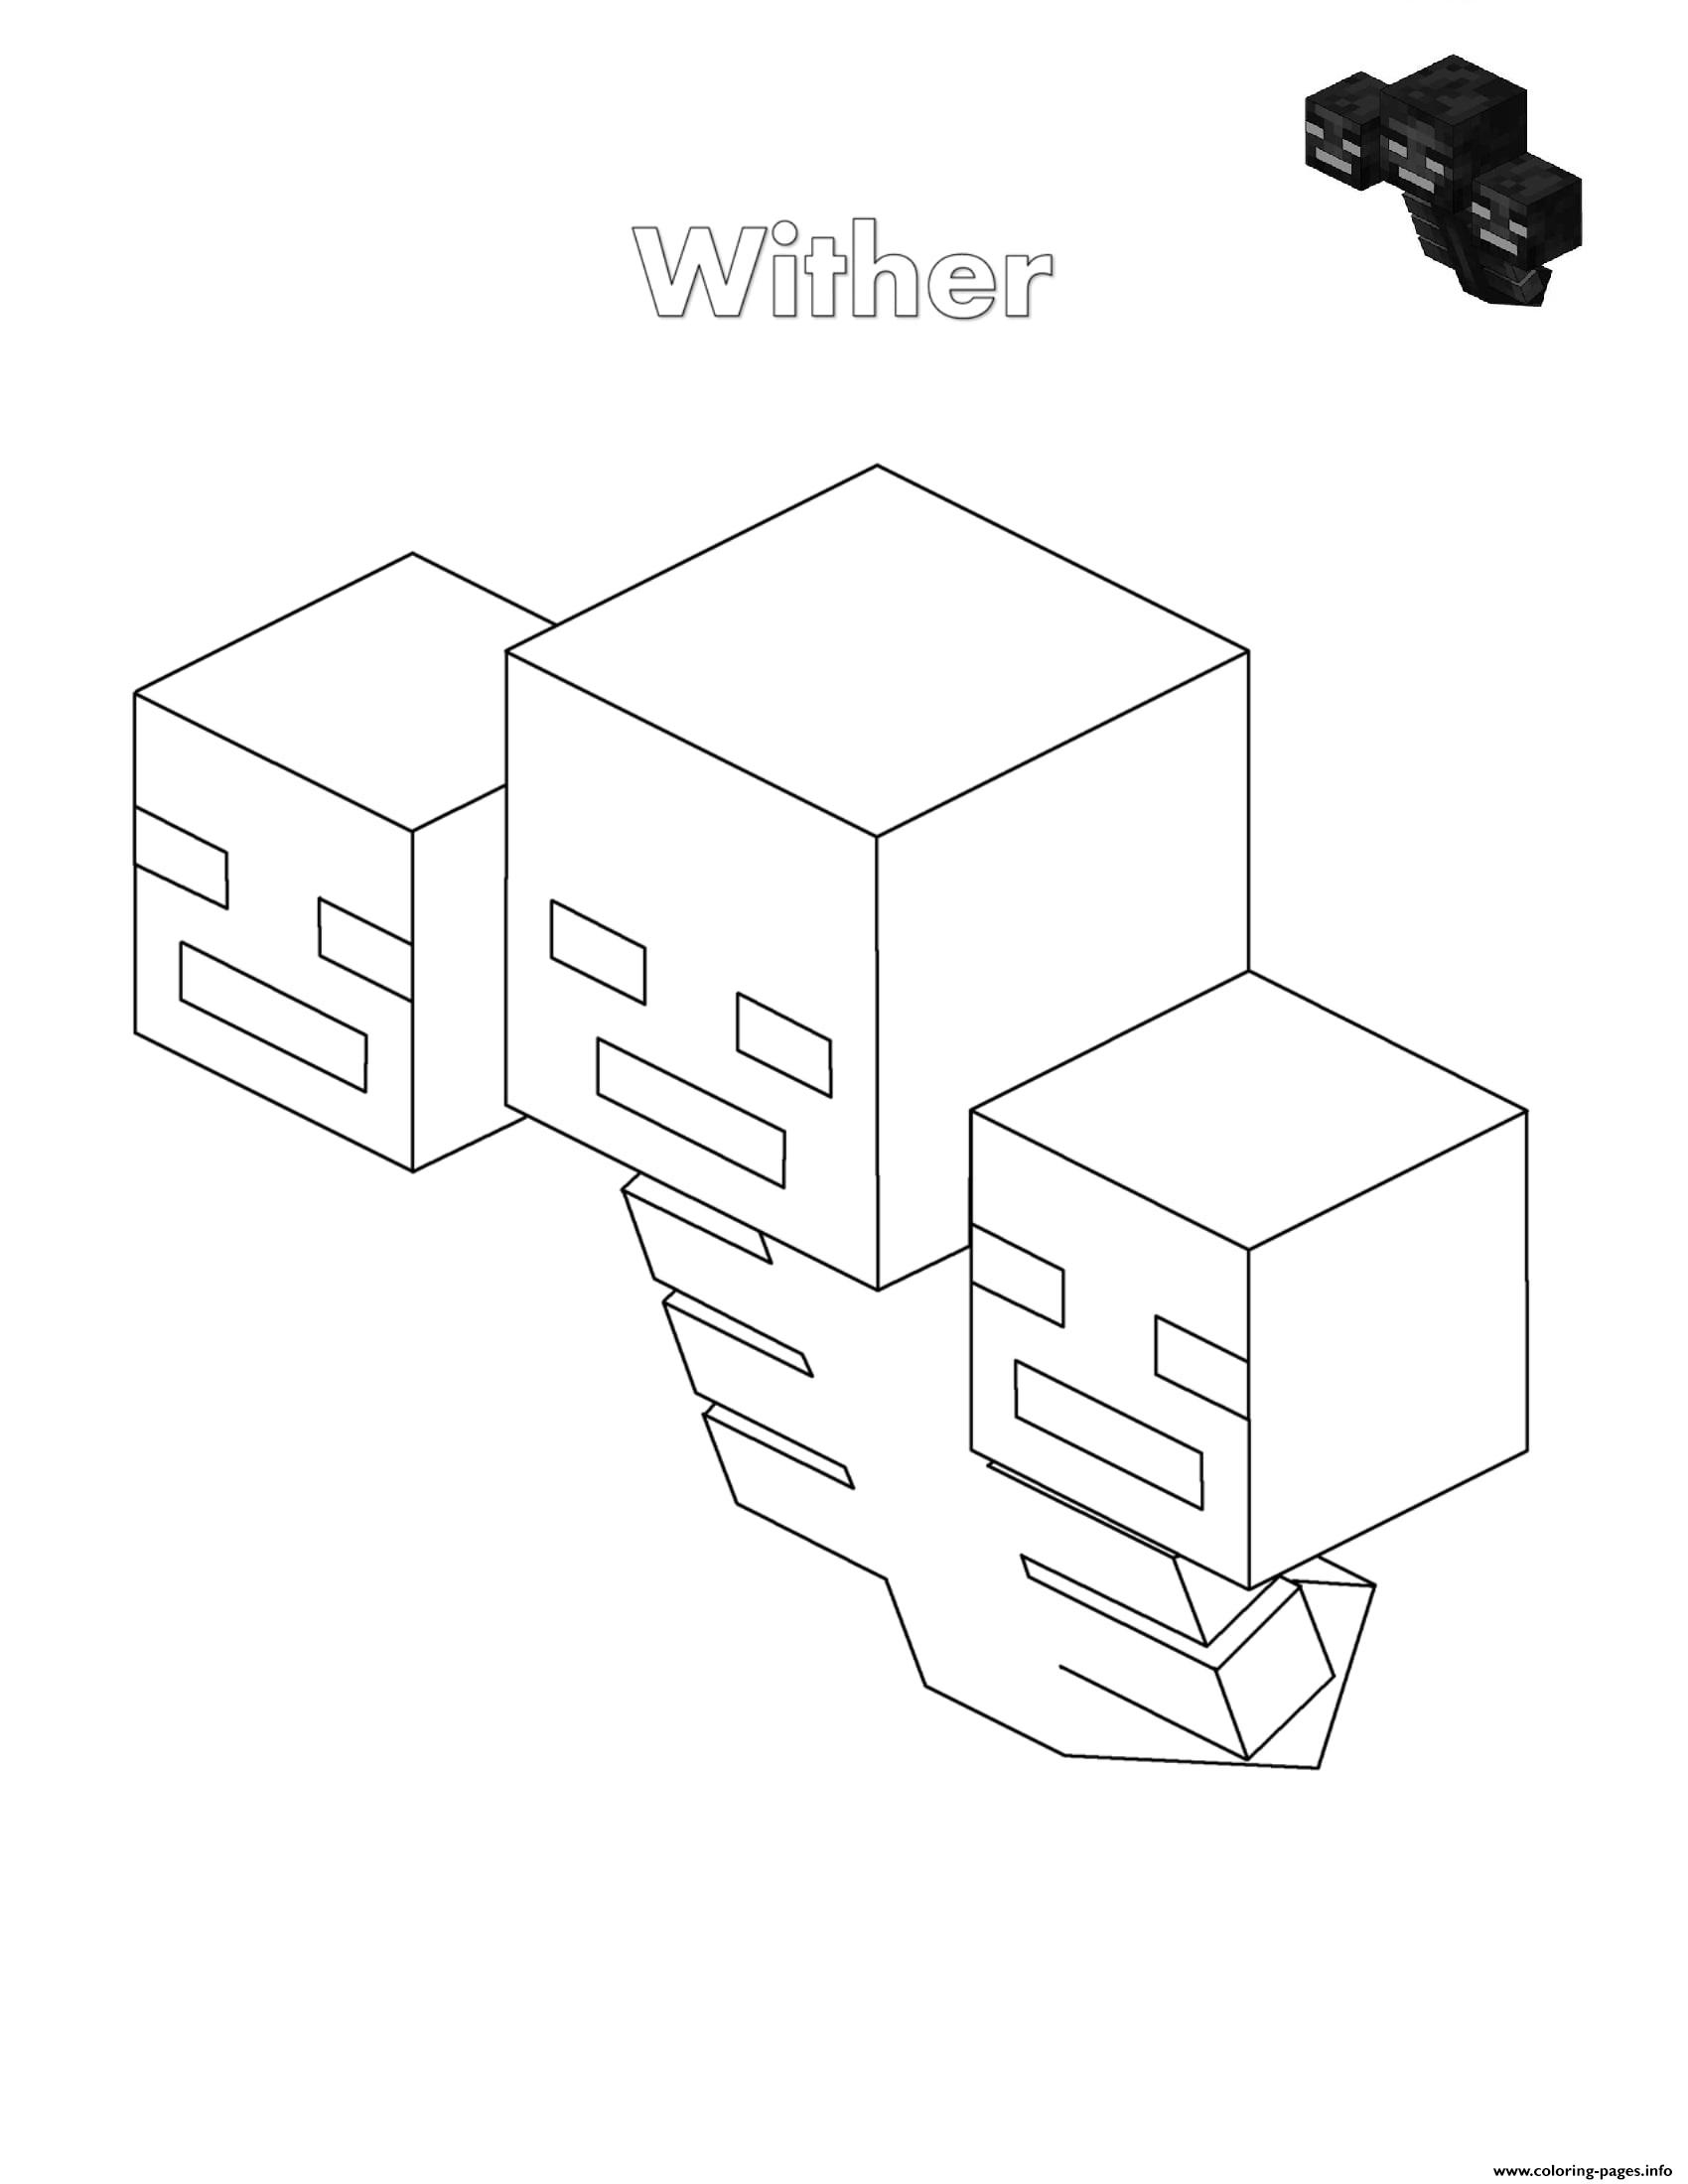 34 Minecraft Wither Coloring Pages - Zsksydny Coloring Pages intérieur Dessin À Imprimer Minecraft